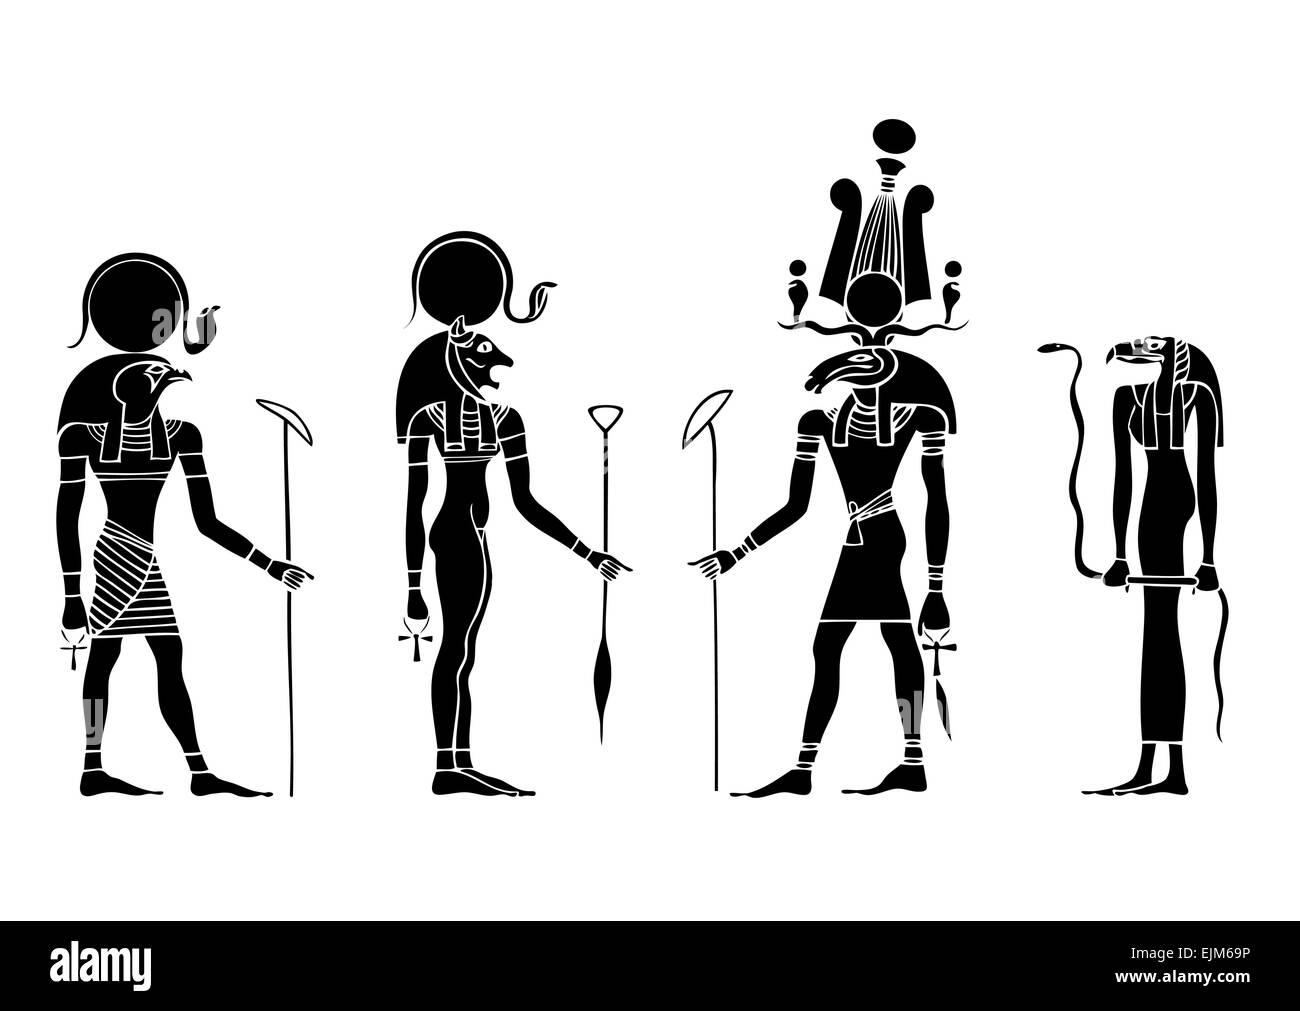 Image of the various gods of ancient Egypt - Ra, Khensu, Bastet - vector Stock Vector